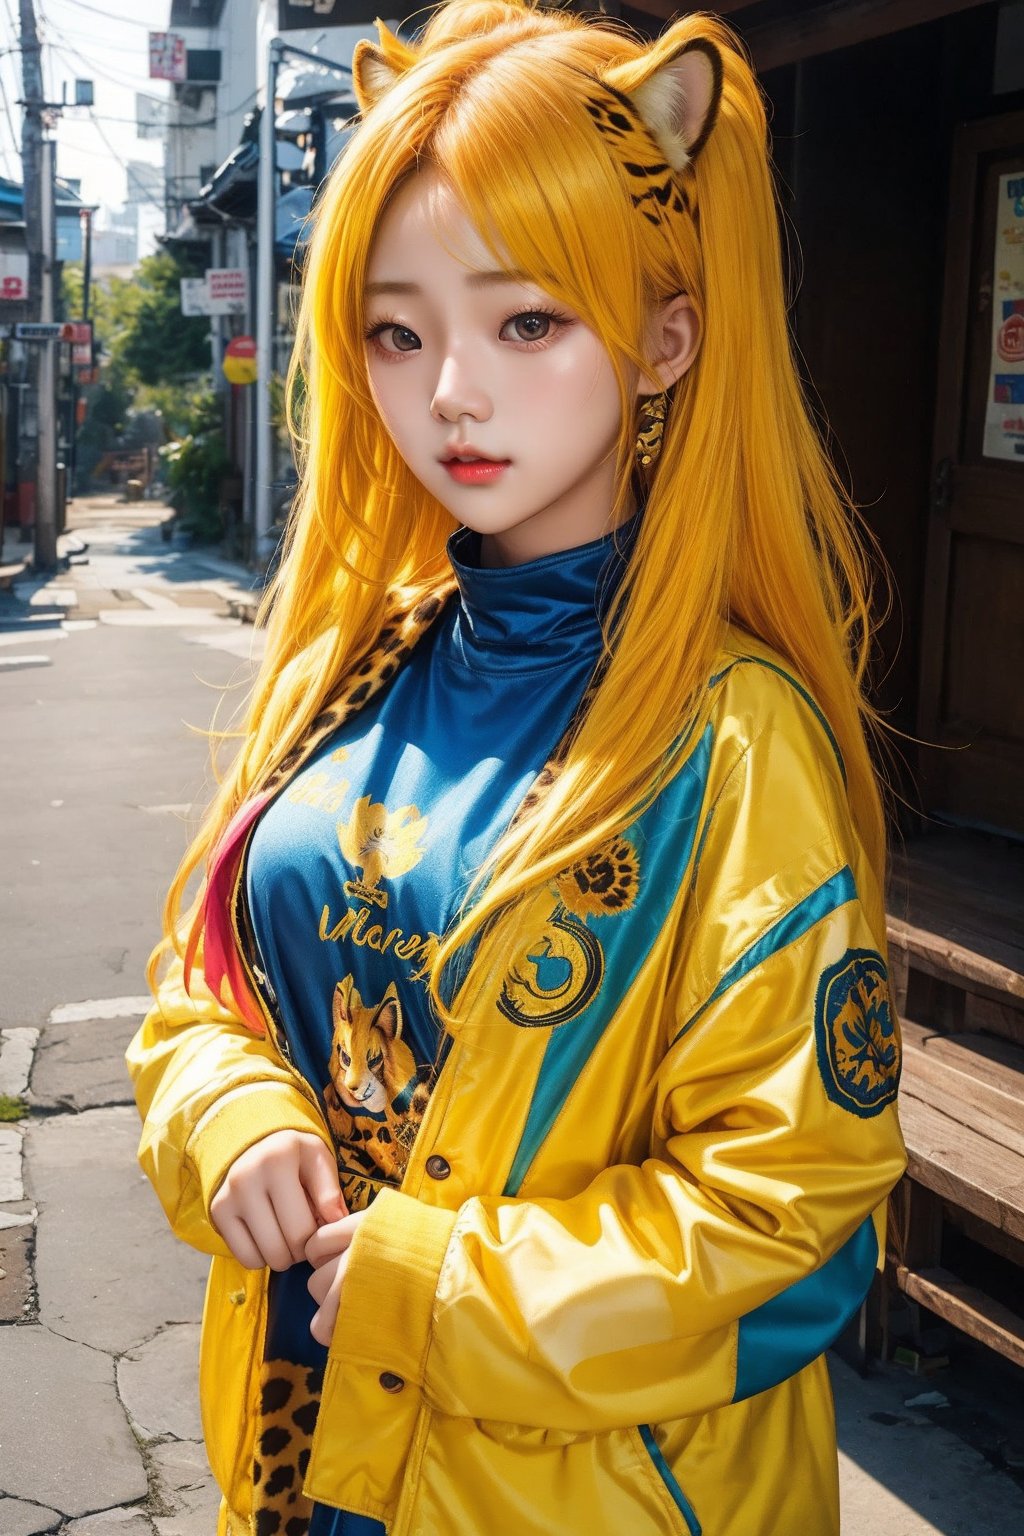 beautiful cute young attractive korean teenage girl, village girl, 18 years old, cute, Instagram model, long yellow_hair, colorful hair, warm, dacing, She is going for a walk with the cheetah, rainbow hair